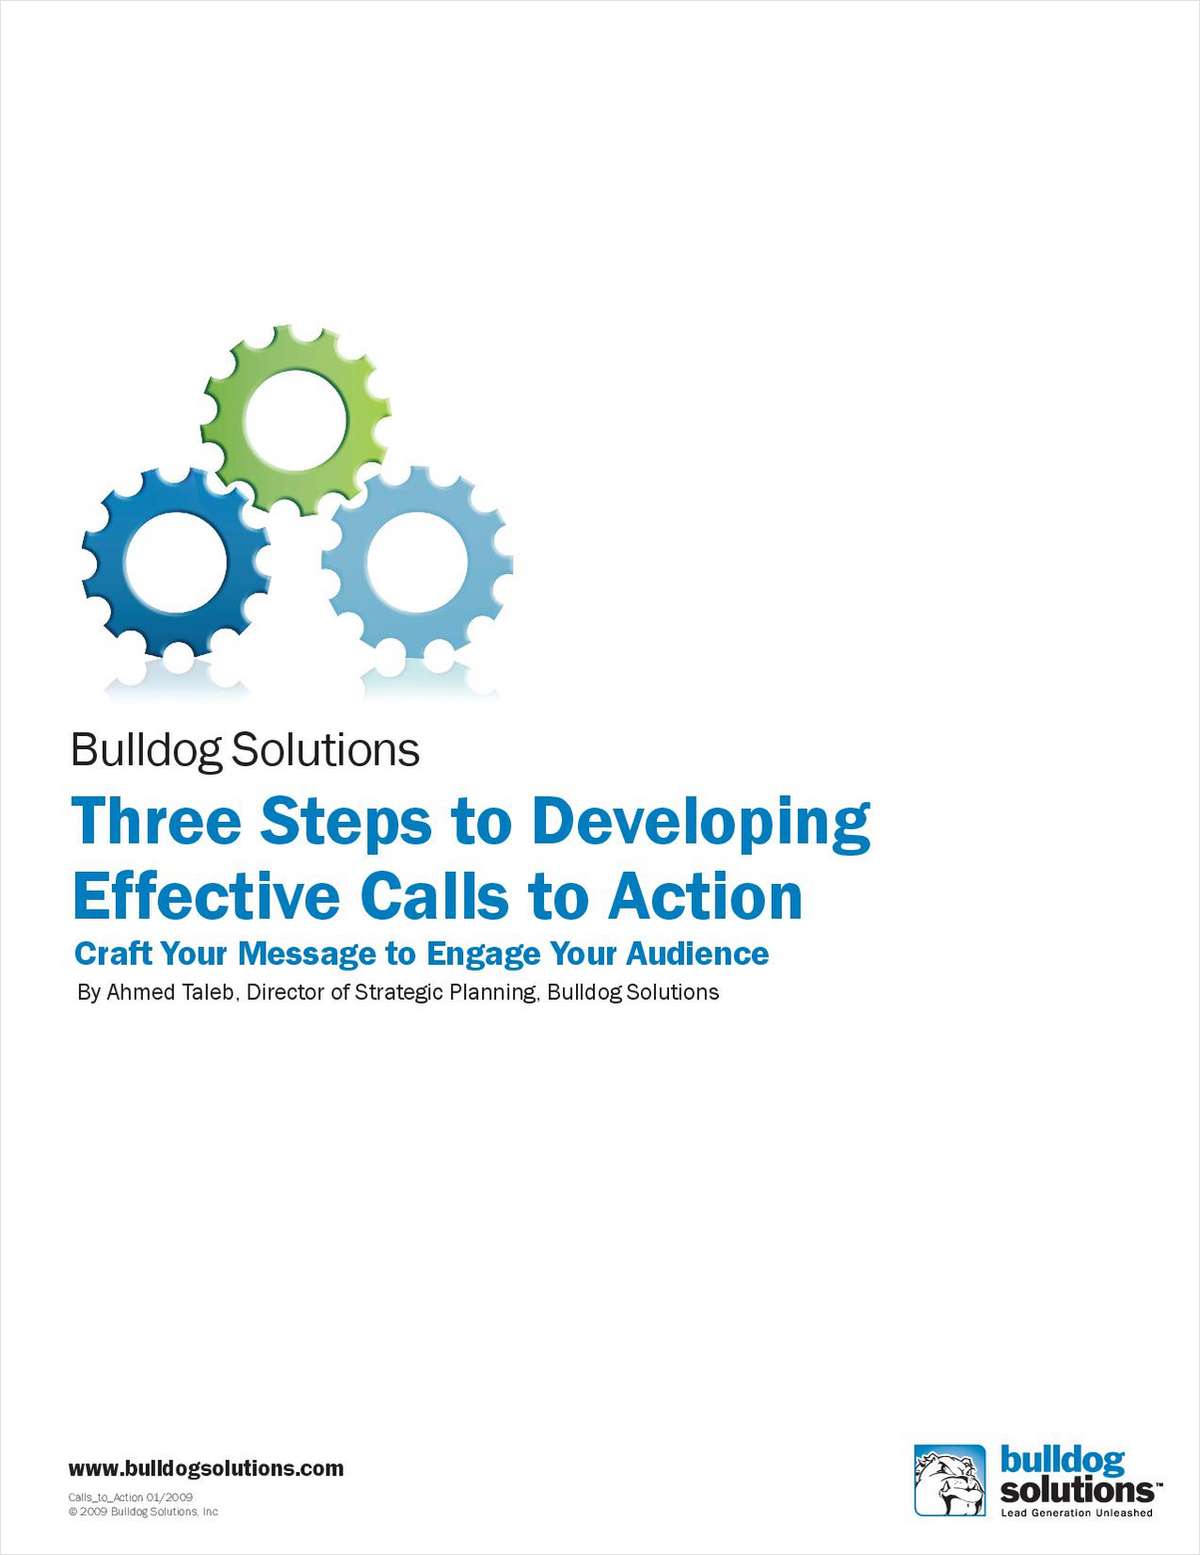 3 Steps to Developing Effective Calls to Action